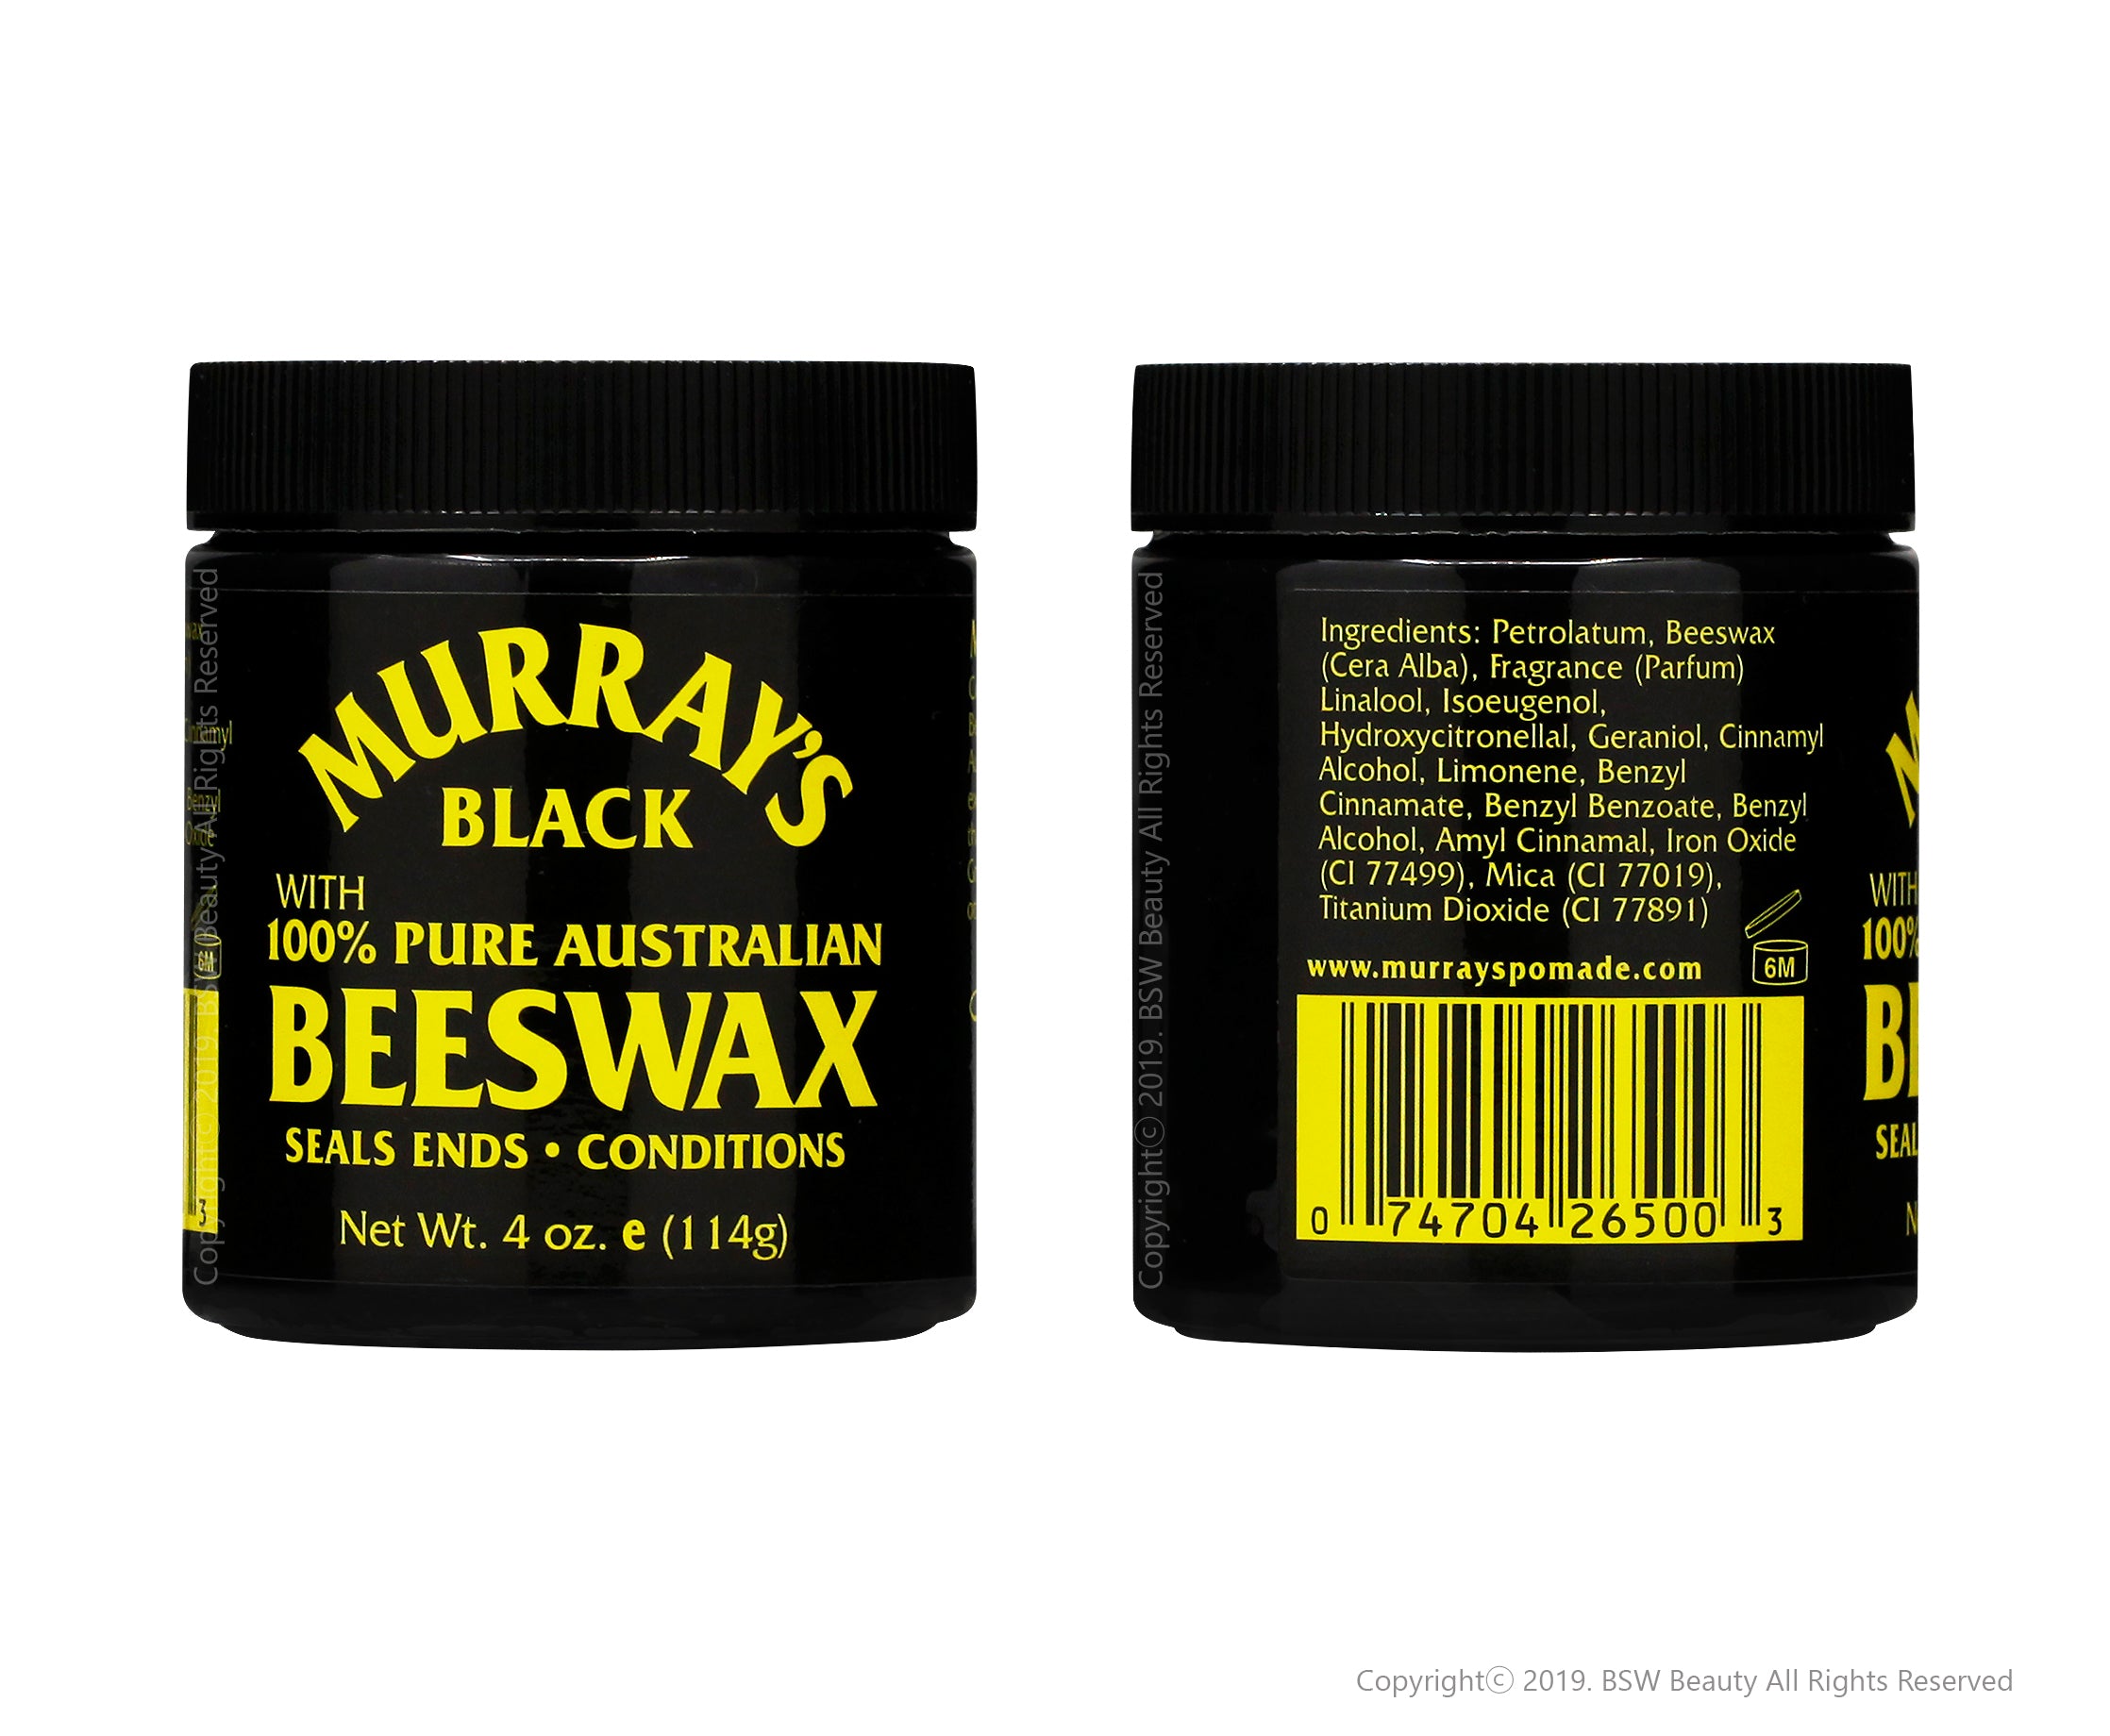  Murrays Beeswax 3.5 oz. Jar (Case of 6) by Murray's